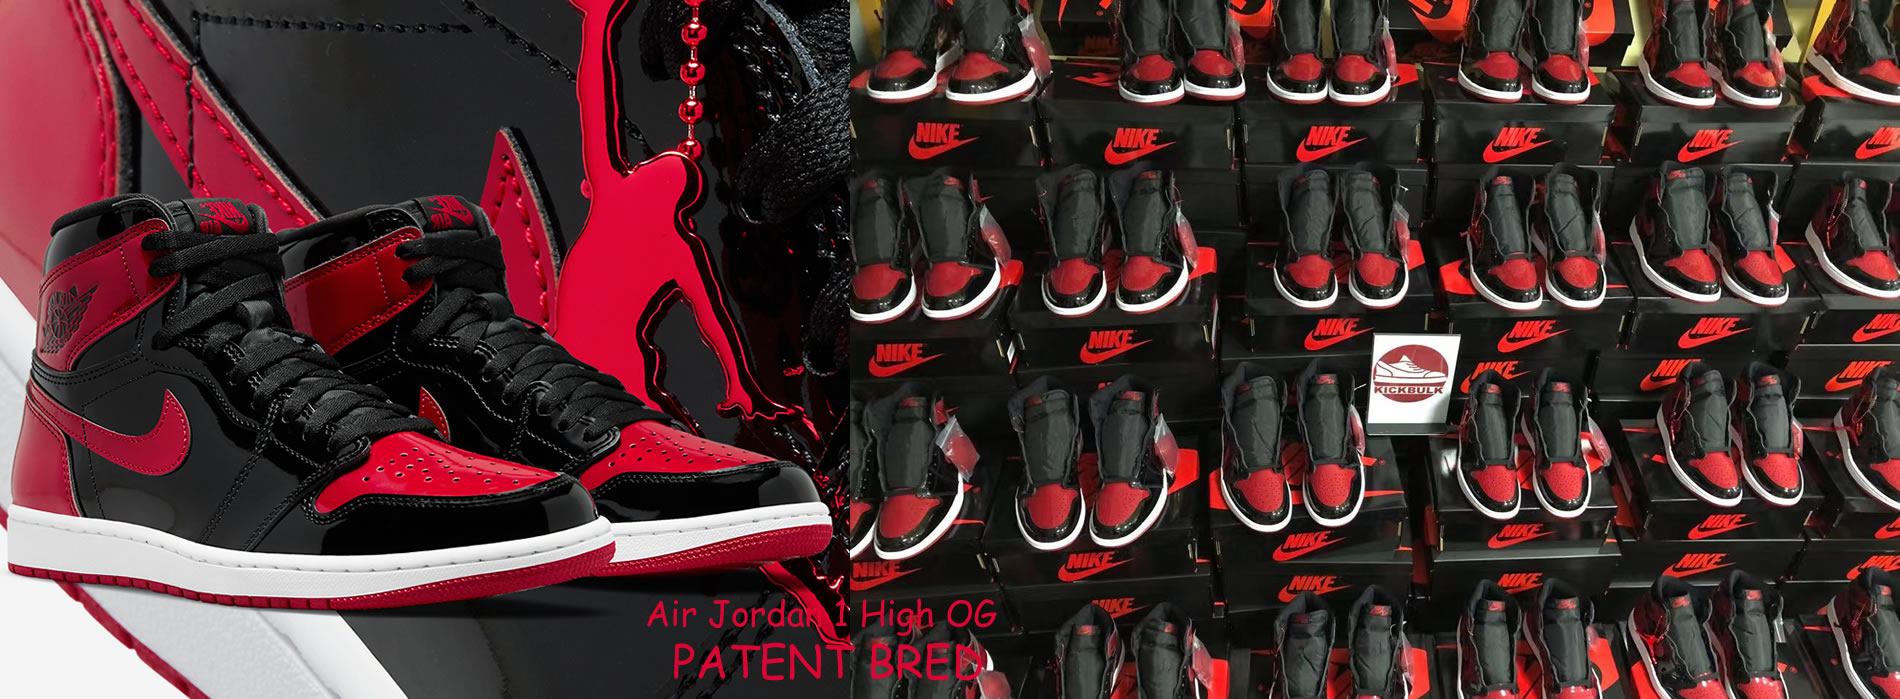 5 sneakers you need to get RETRO HIGH OG PATENT 'BRED' 555088-063